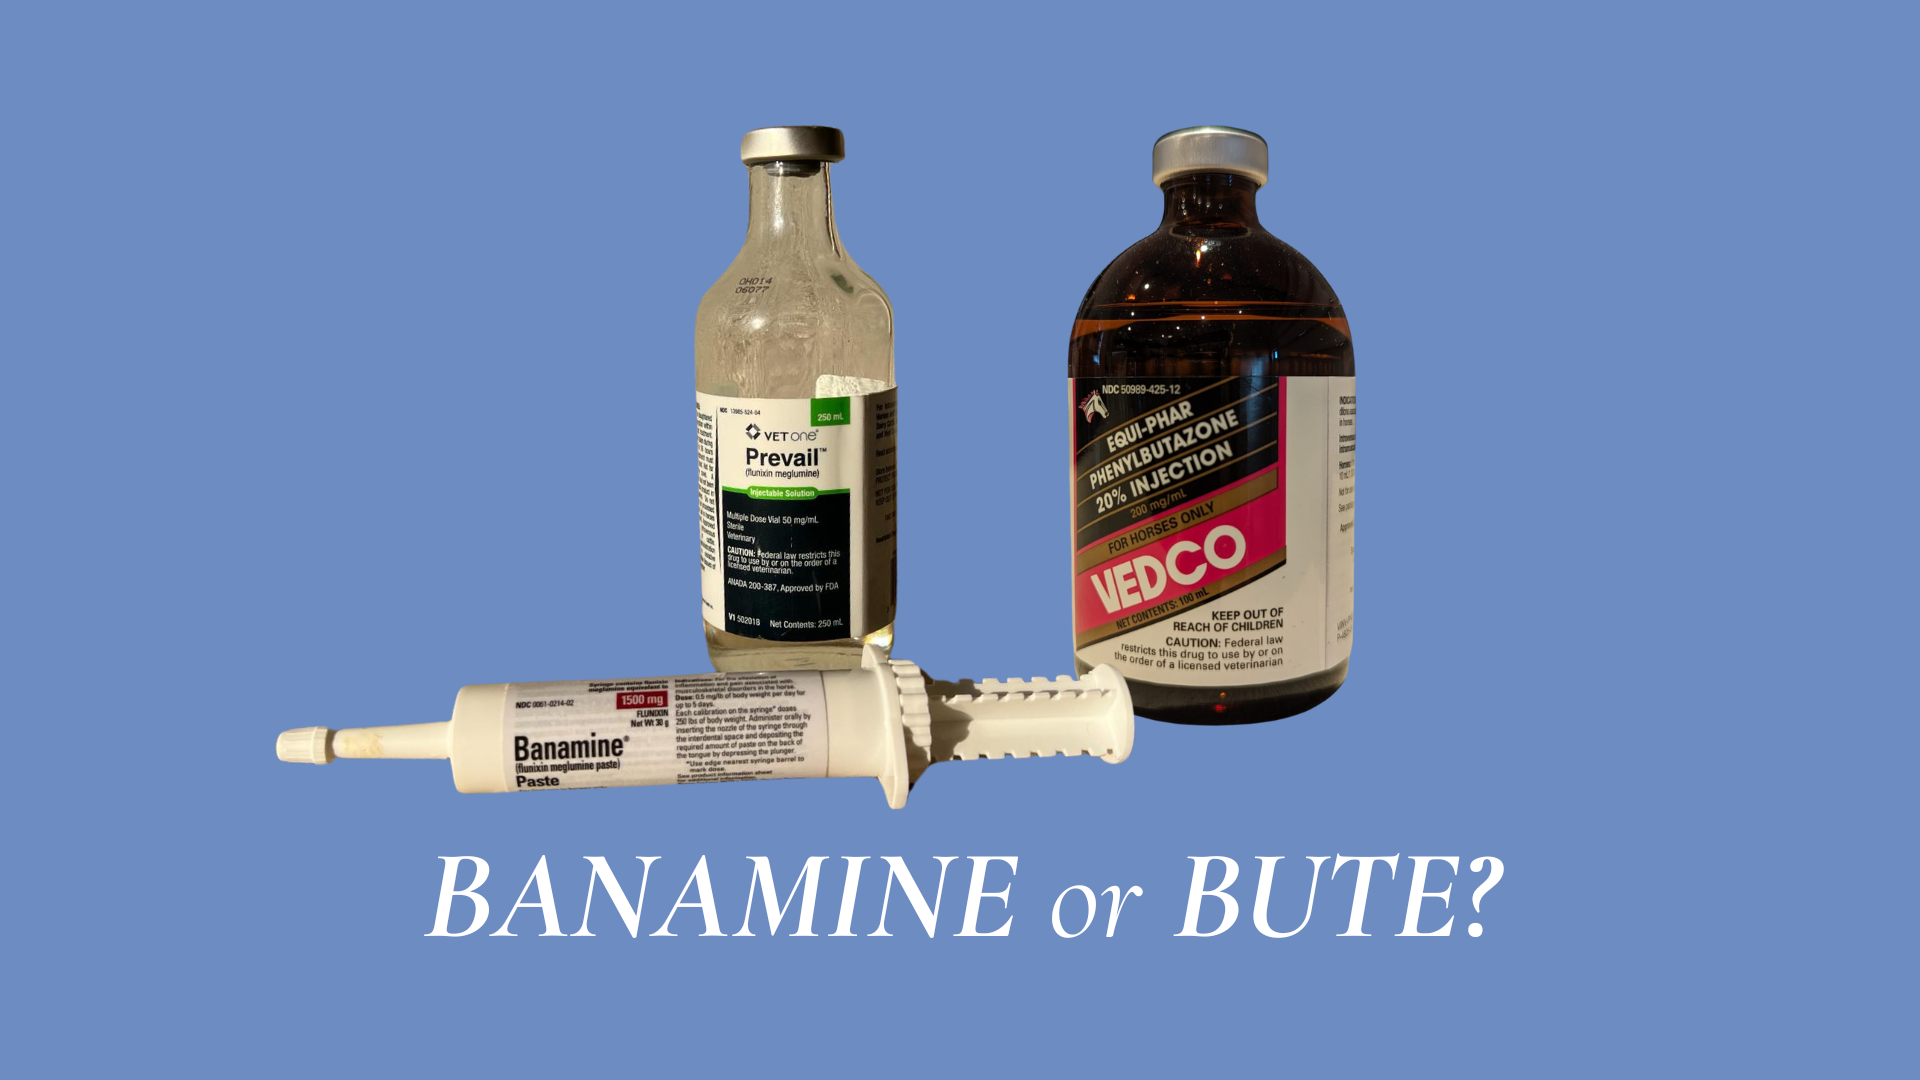 Banamine or Bute?